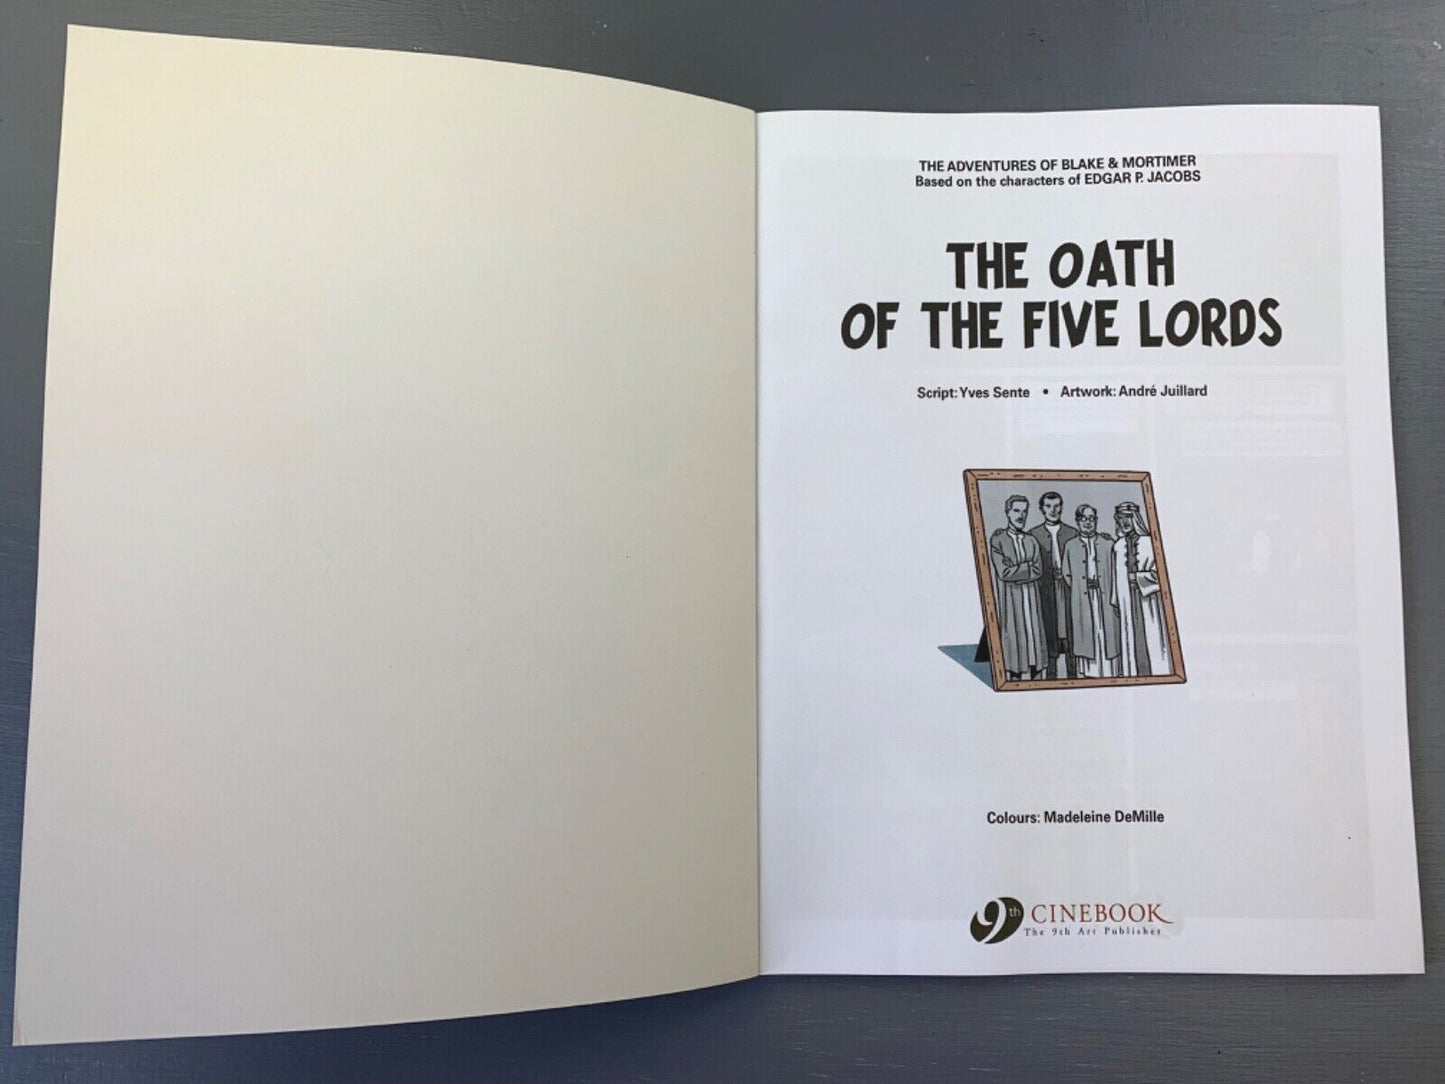 The Oath of the Five Lords - Blake & Mortimer Comic Volume 18 - Cinebook UK Paperback Edition